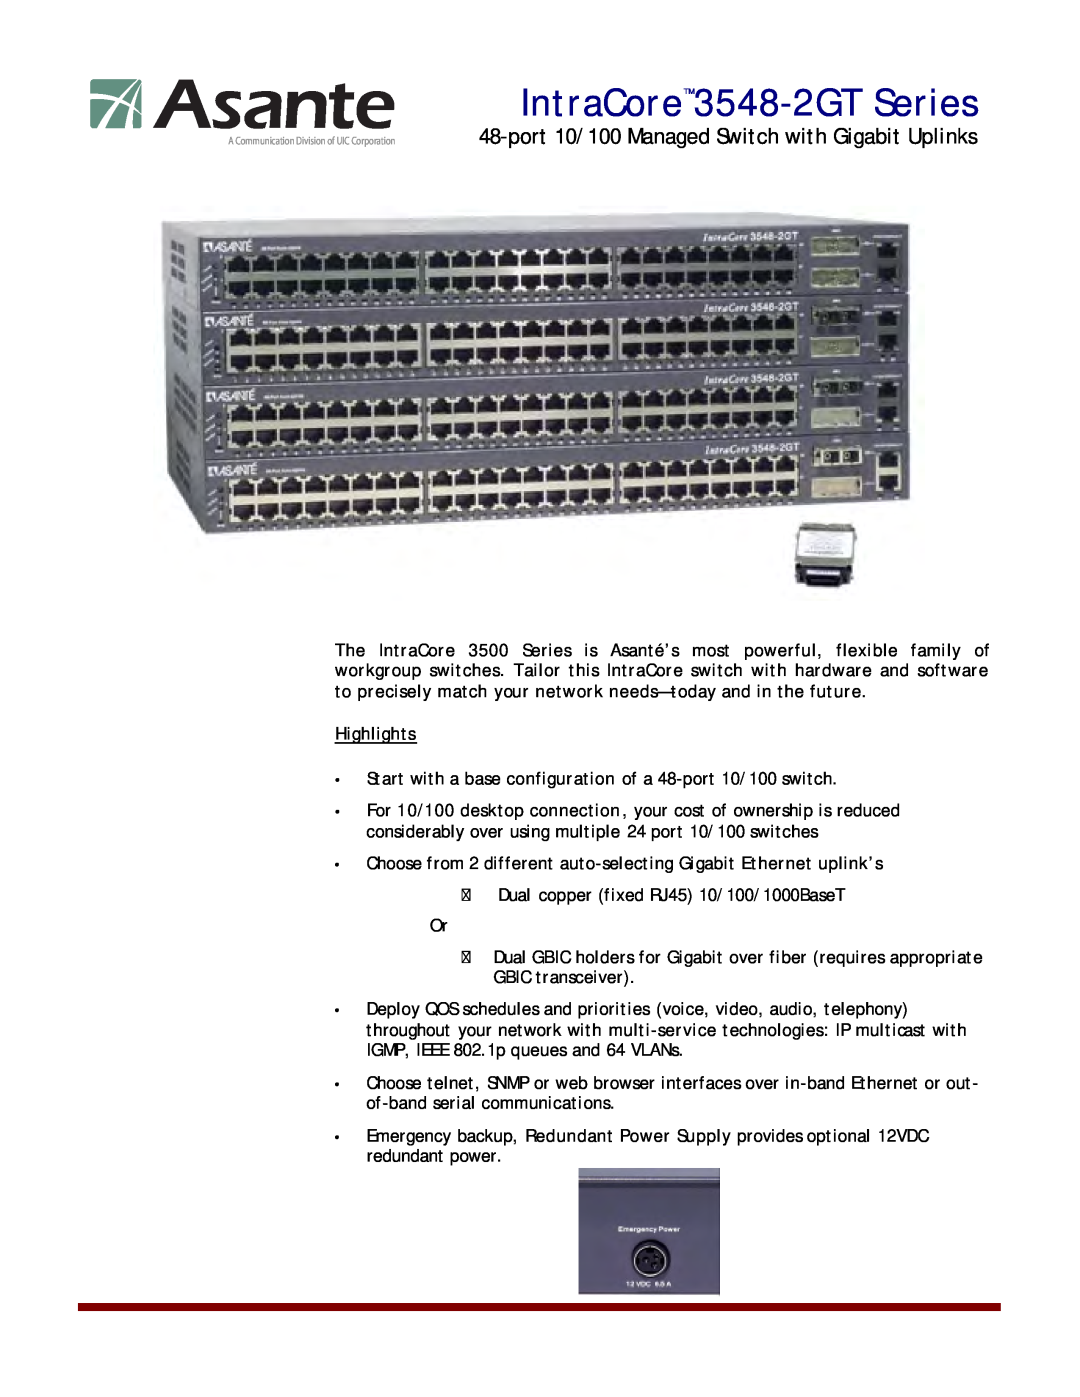 Asante Technologies manual IntraCore 3548-2GT Series, port 10/100 Managed Switch with Gigabit Uplinks, Highlights 